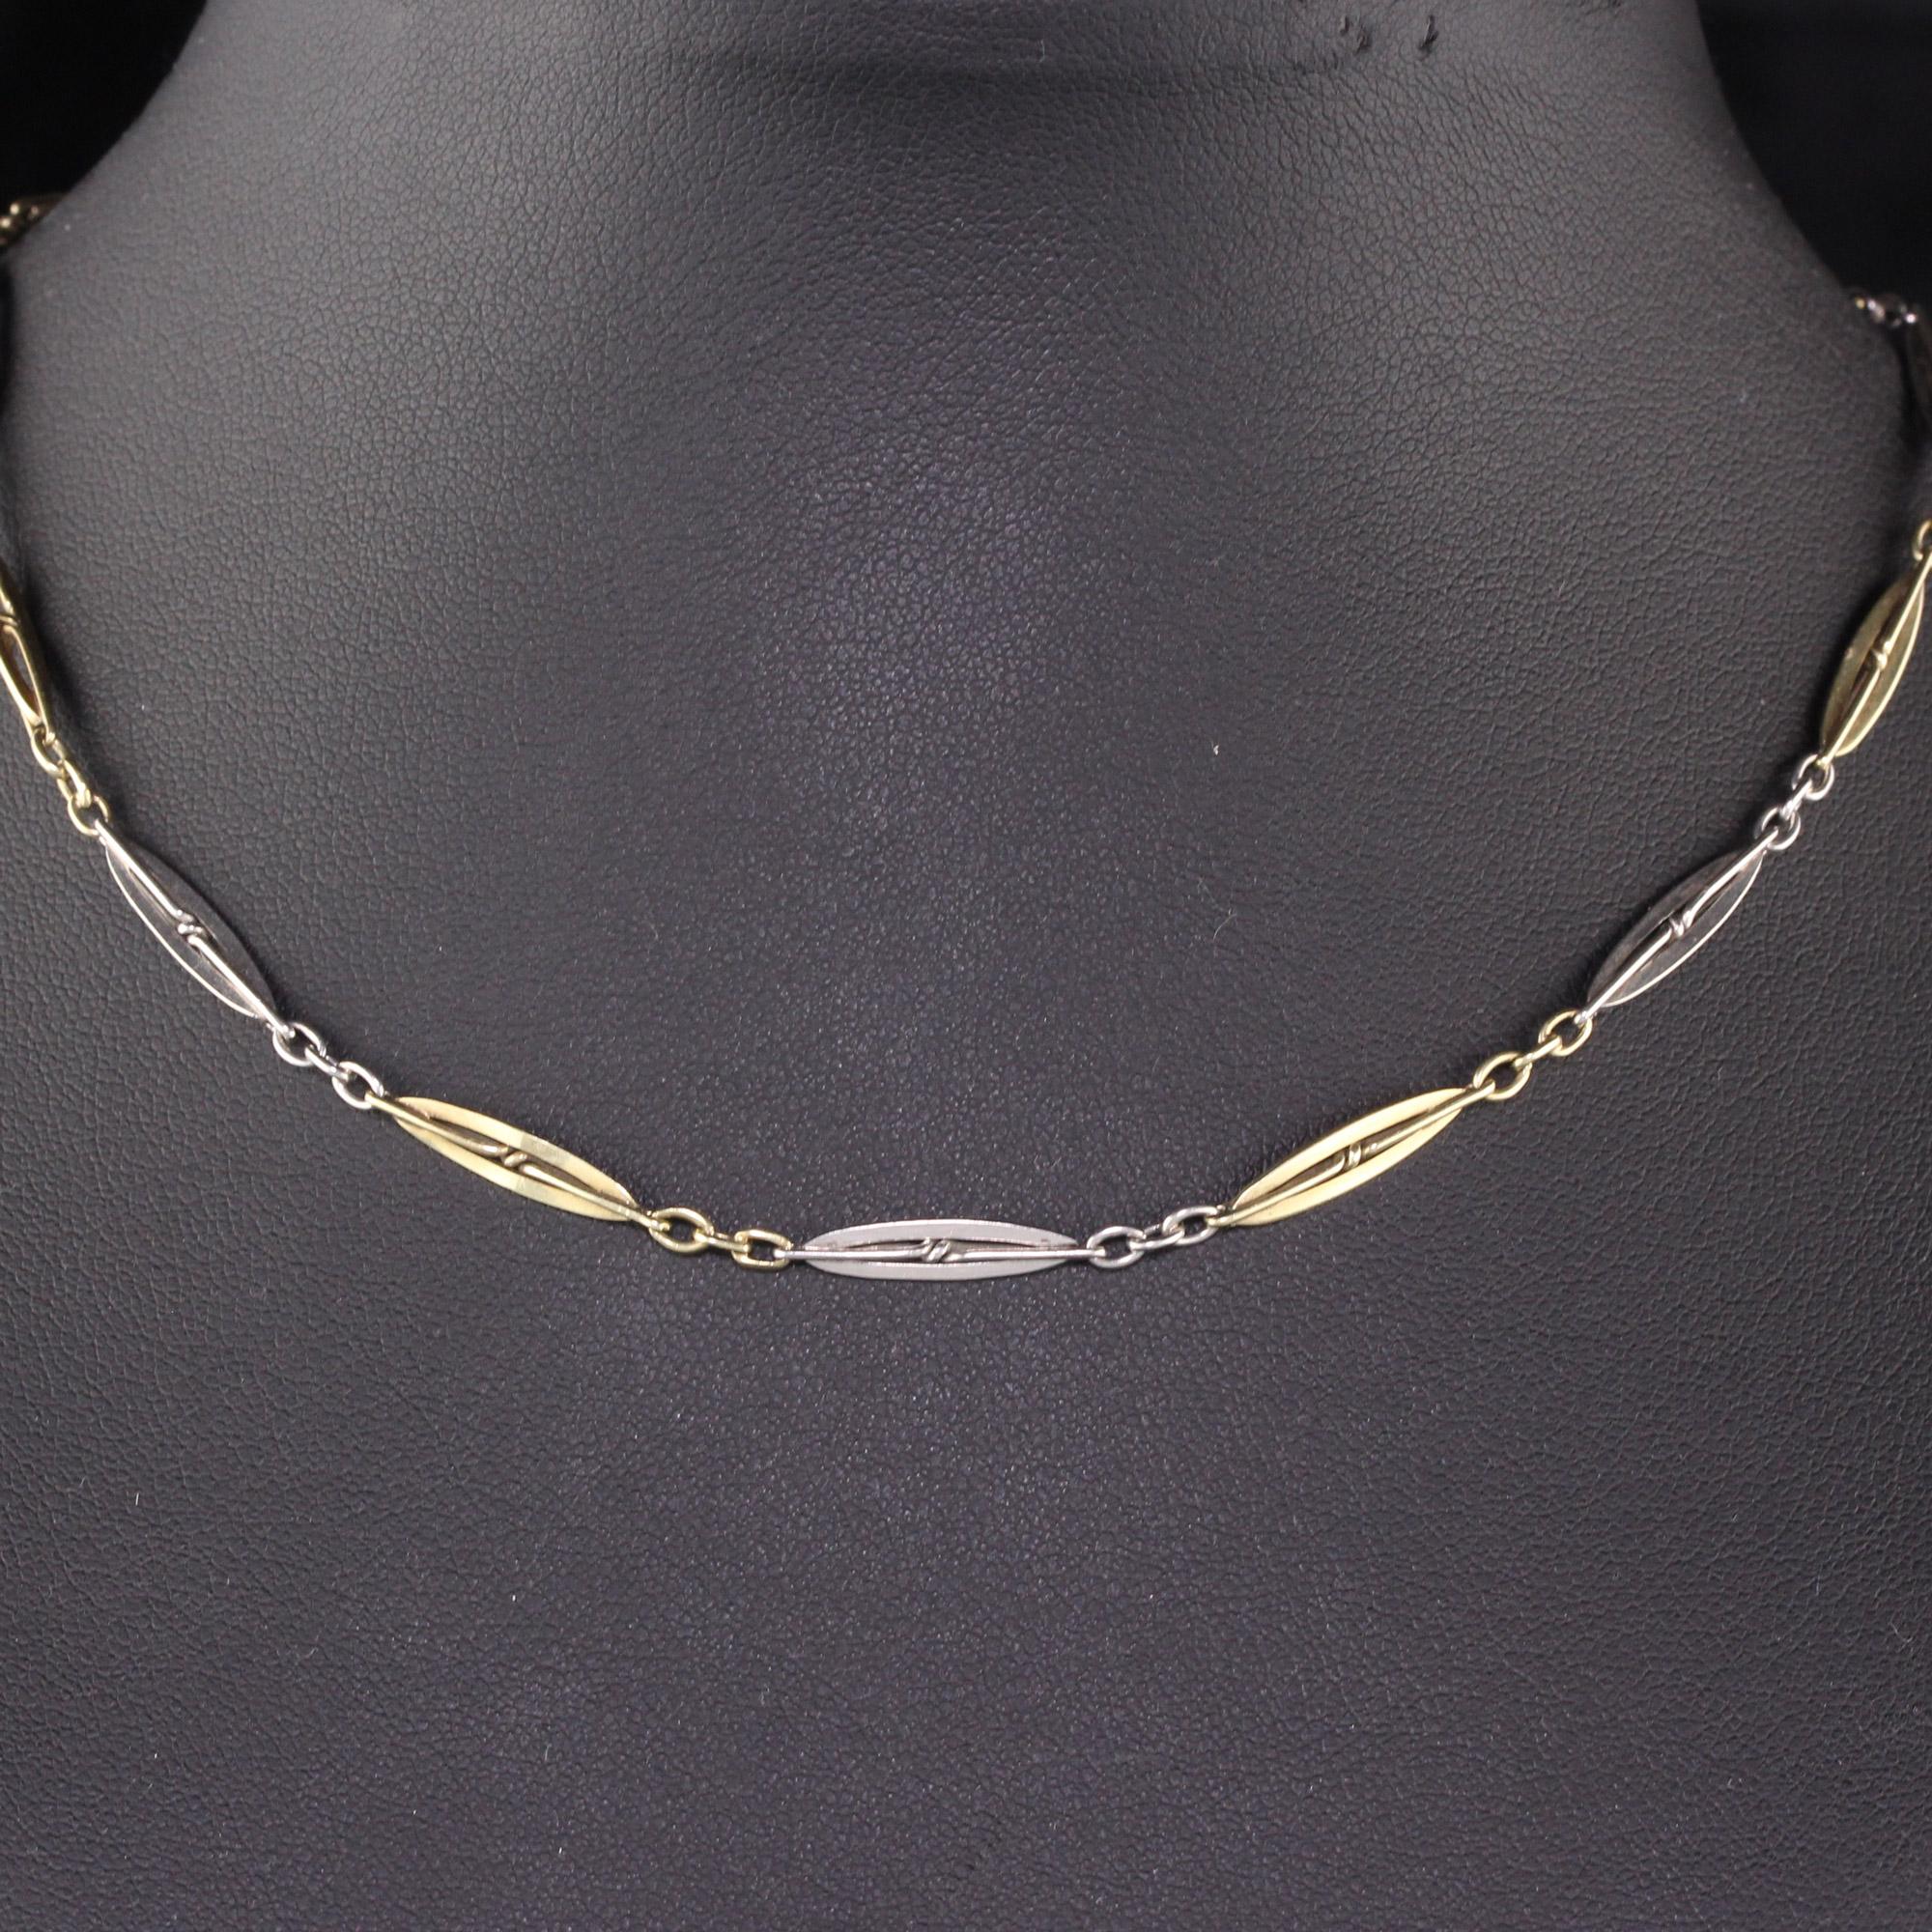 Antique Art Deco 18K Yellow Gold and Platinum Link Necklace / Watch Fob In Good Condition For Sale In Great Neck, NY